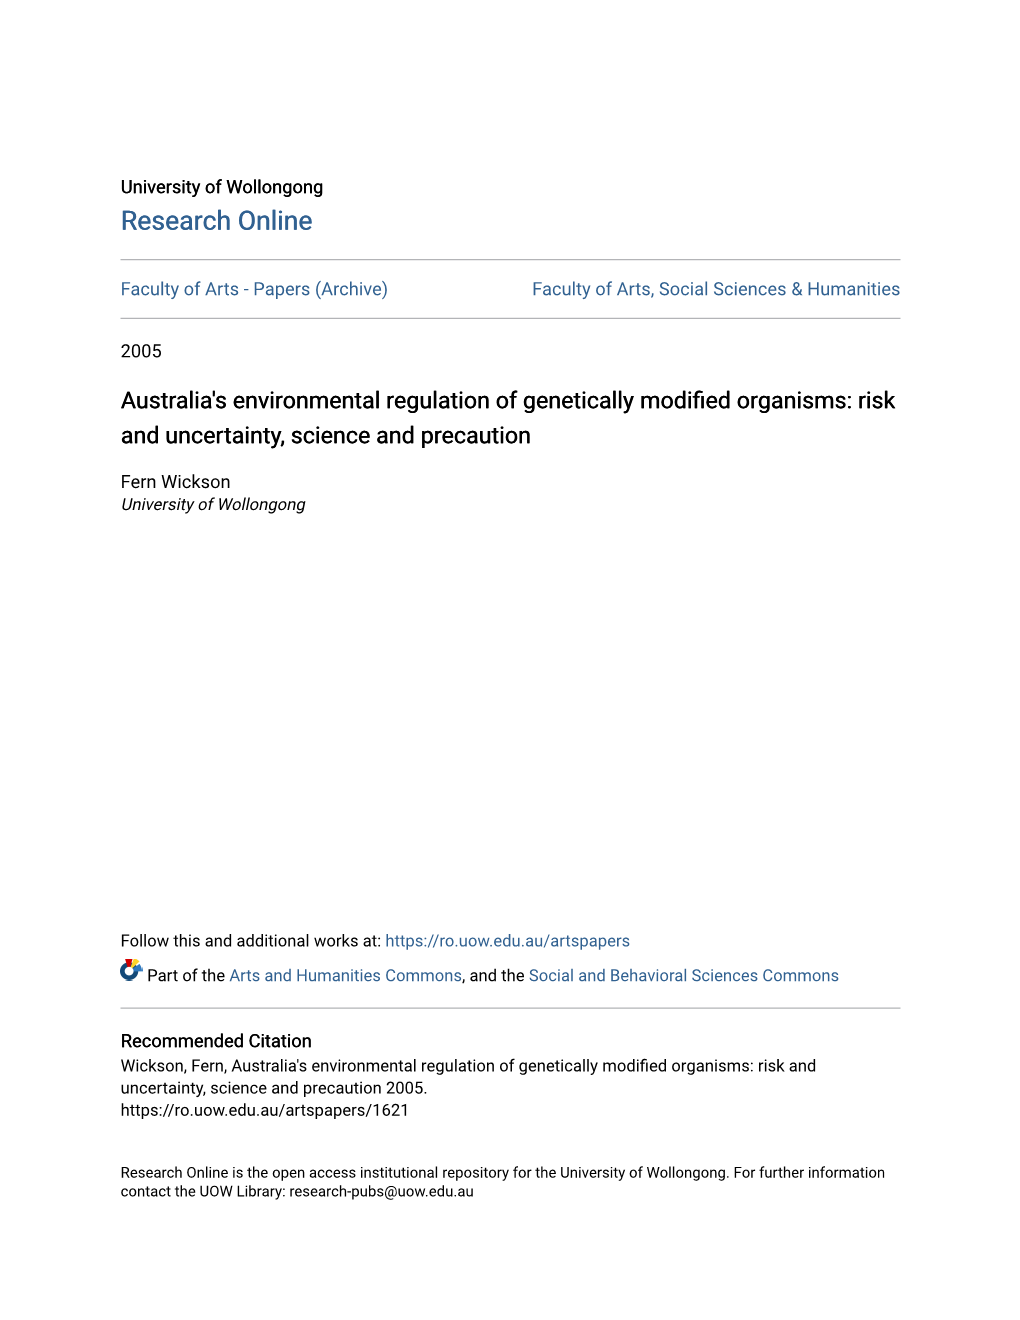 Australia's Environmental Regulation of Genetically Modified Organisms: Risk and Uncertainty, Science and Precaution